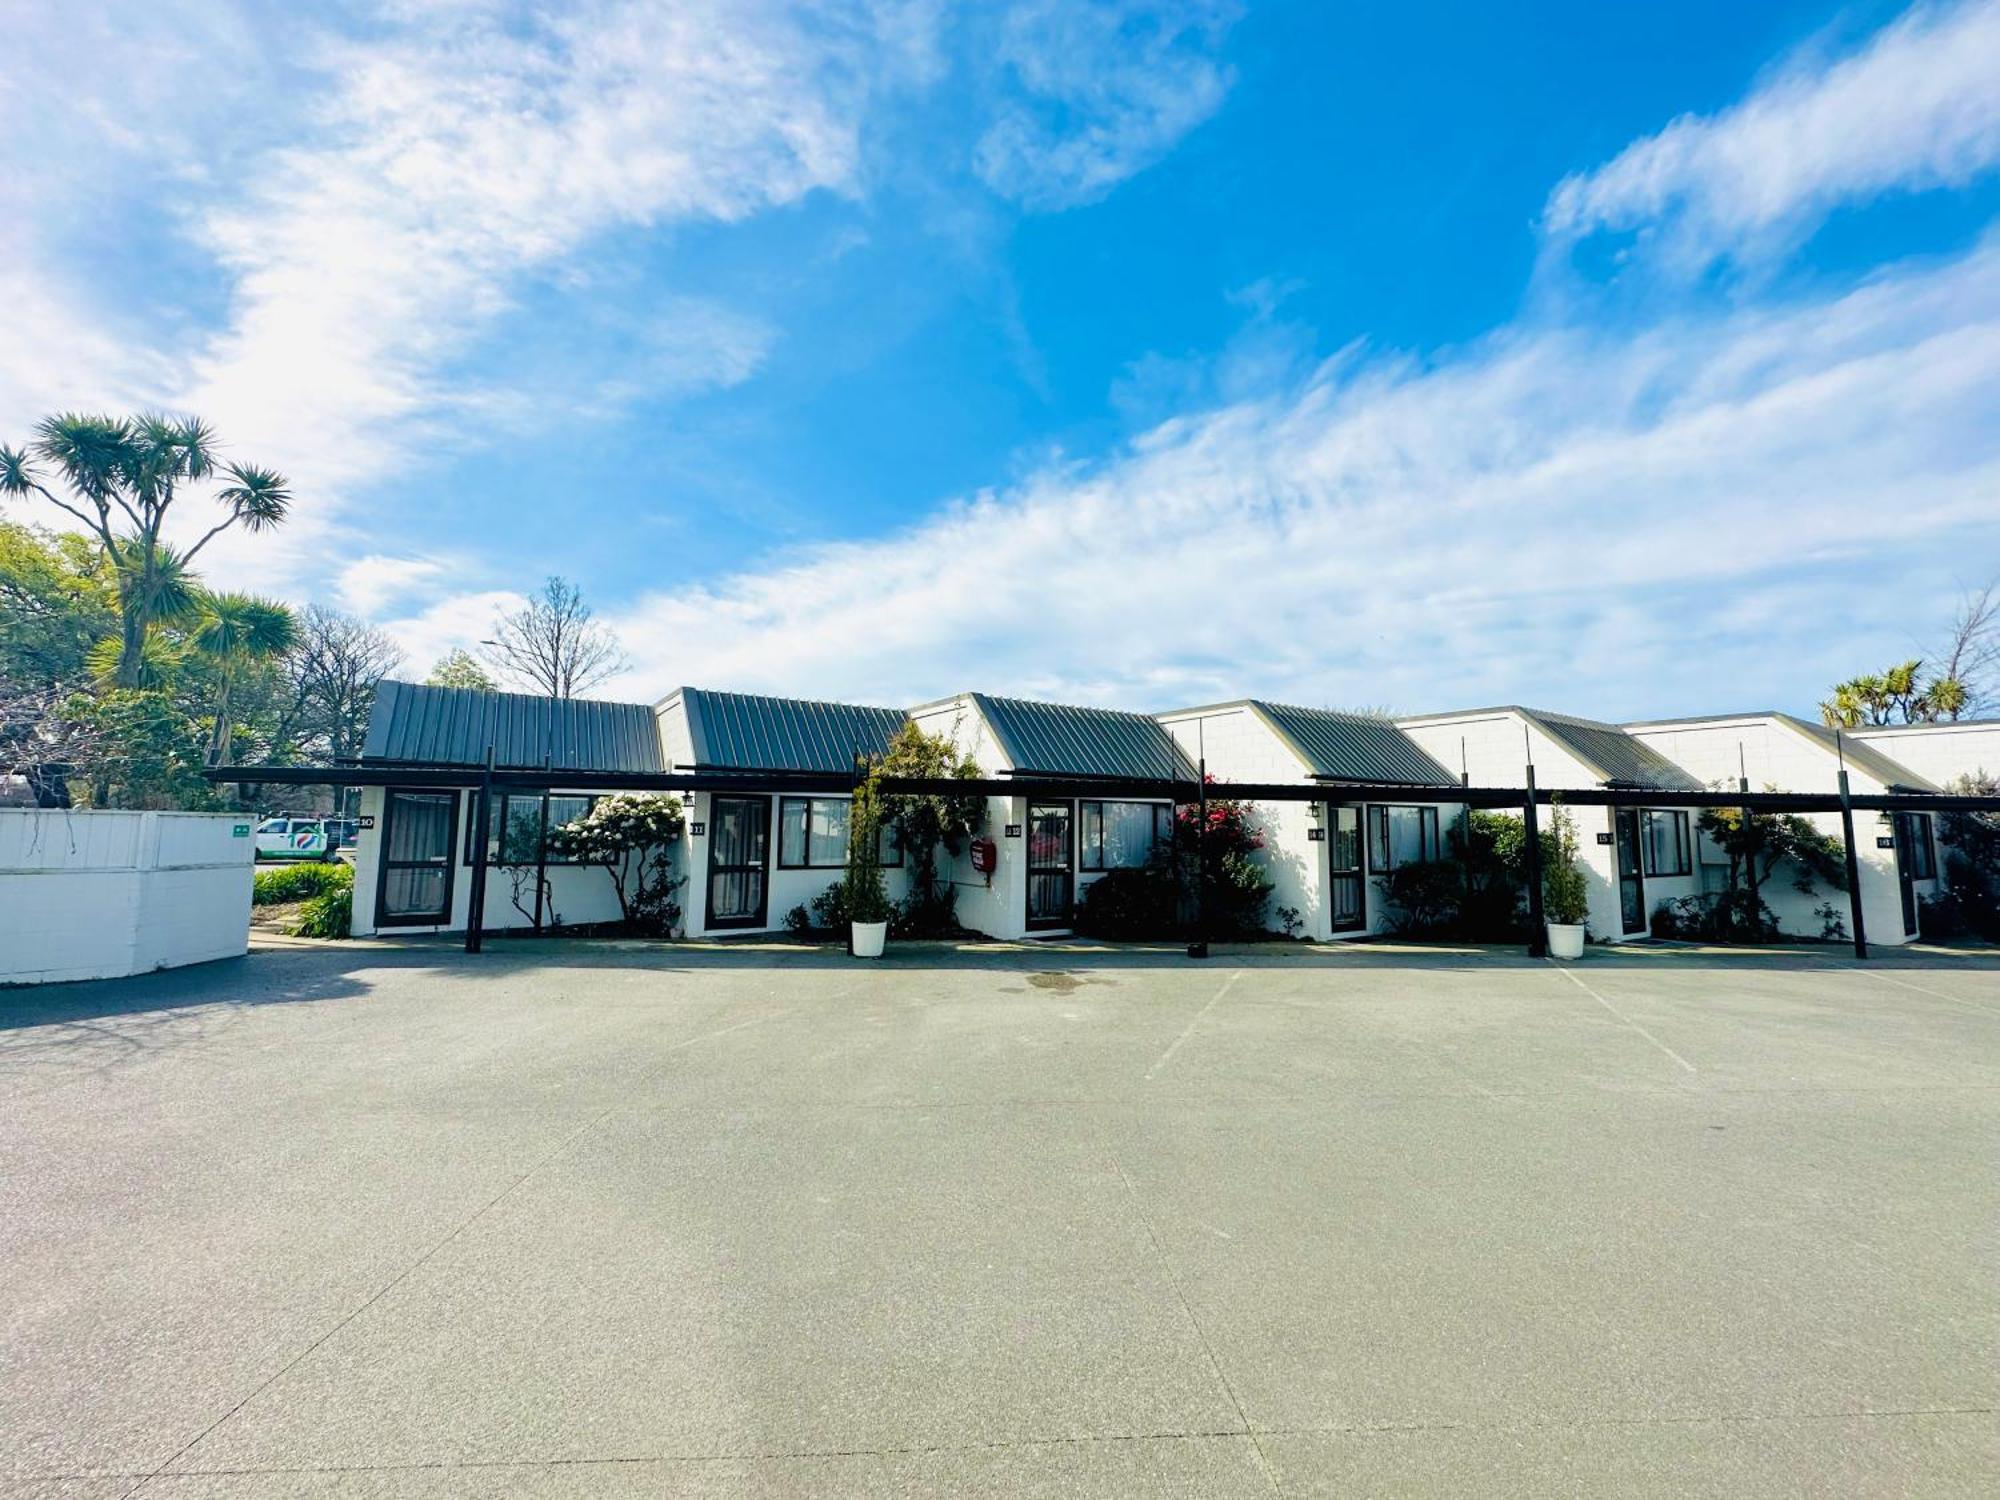 Gothic Heights Motel Christchurch Exterior foto